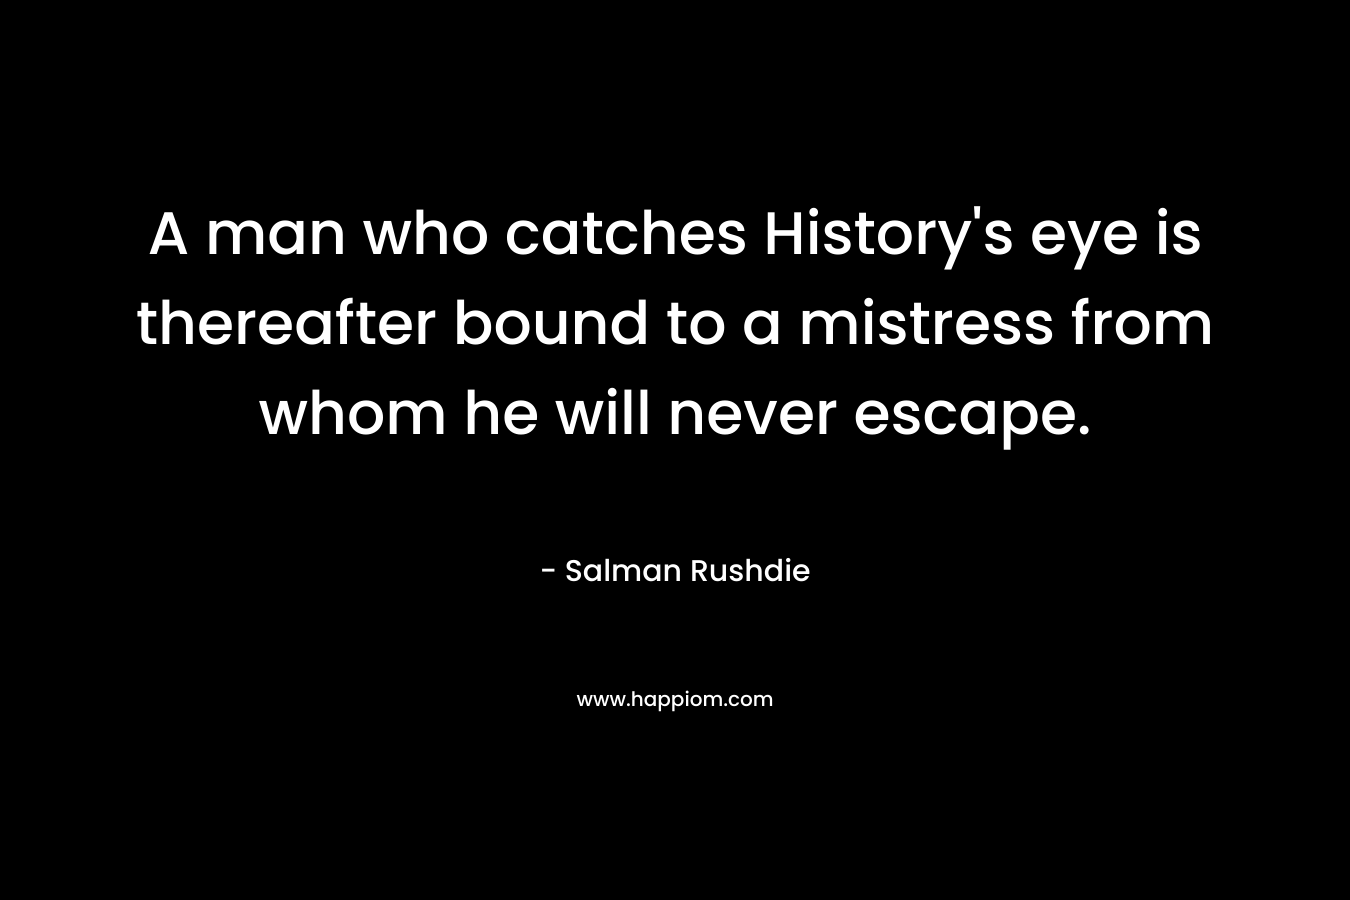 A man who catches History's eye is thereafter bound to a mistress from whom he will never escape.